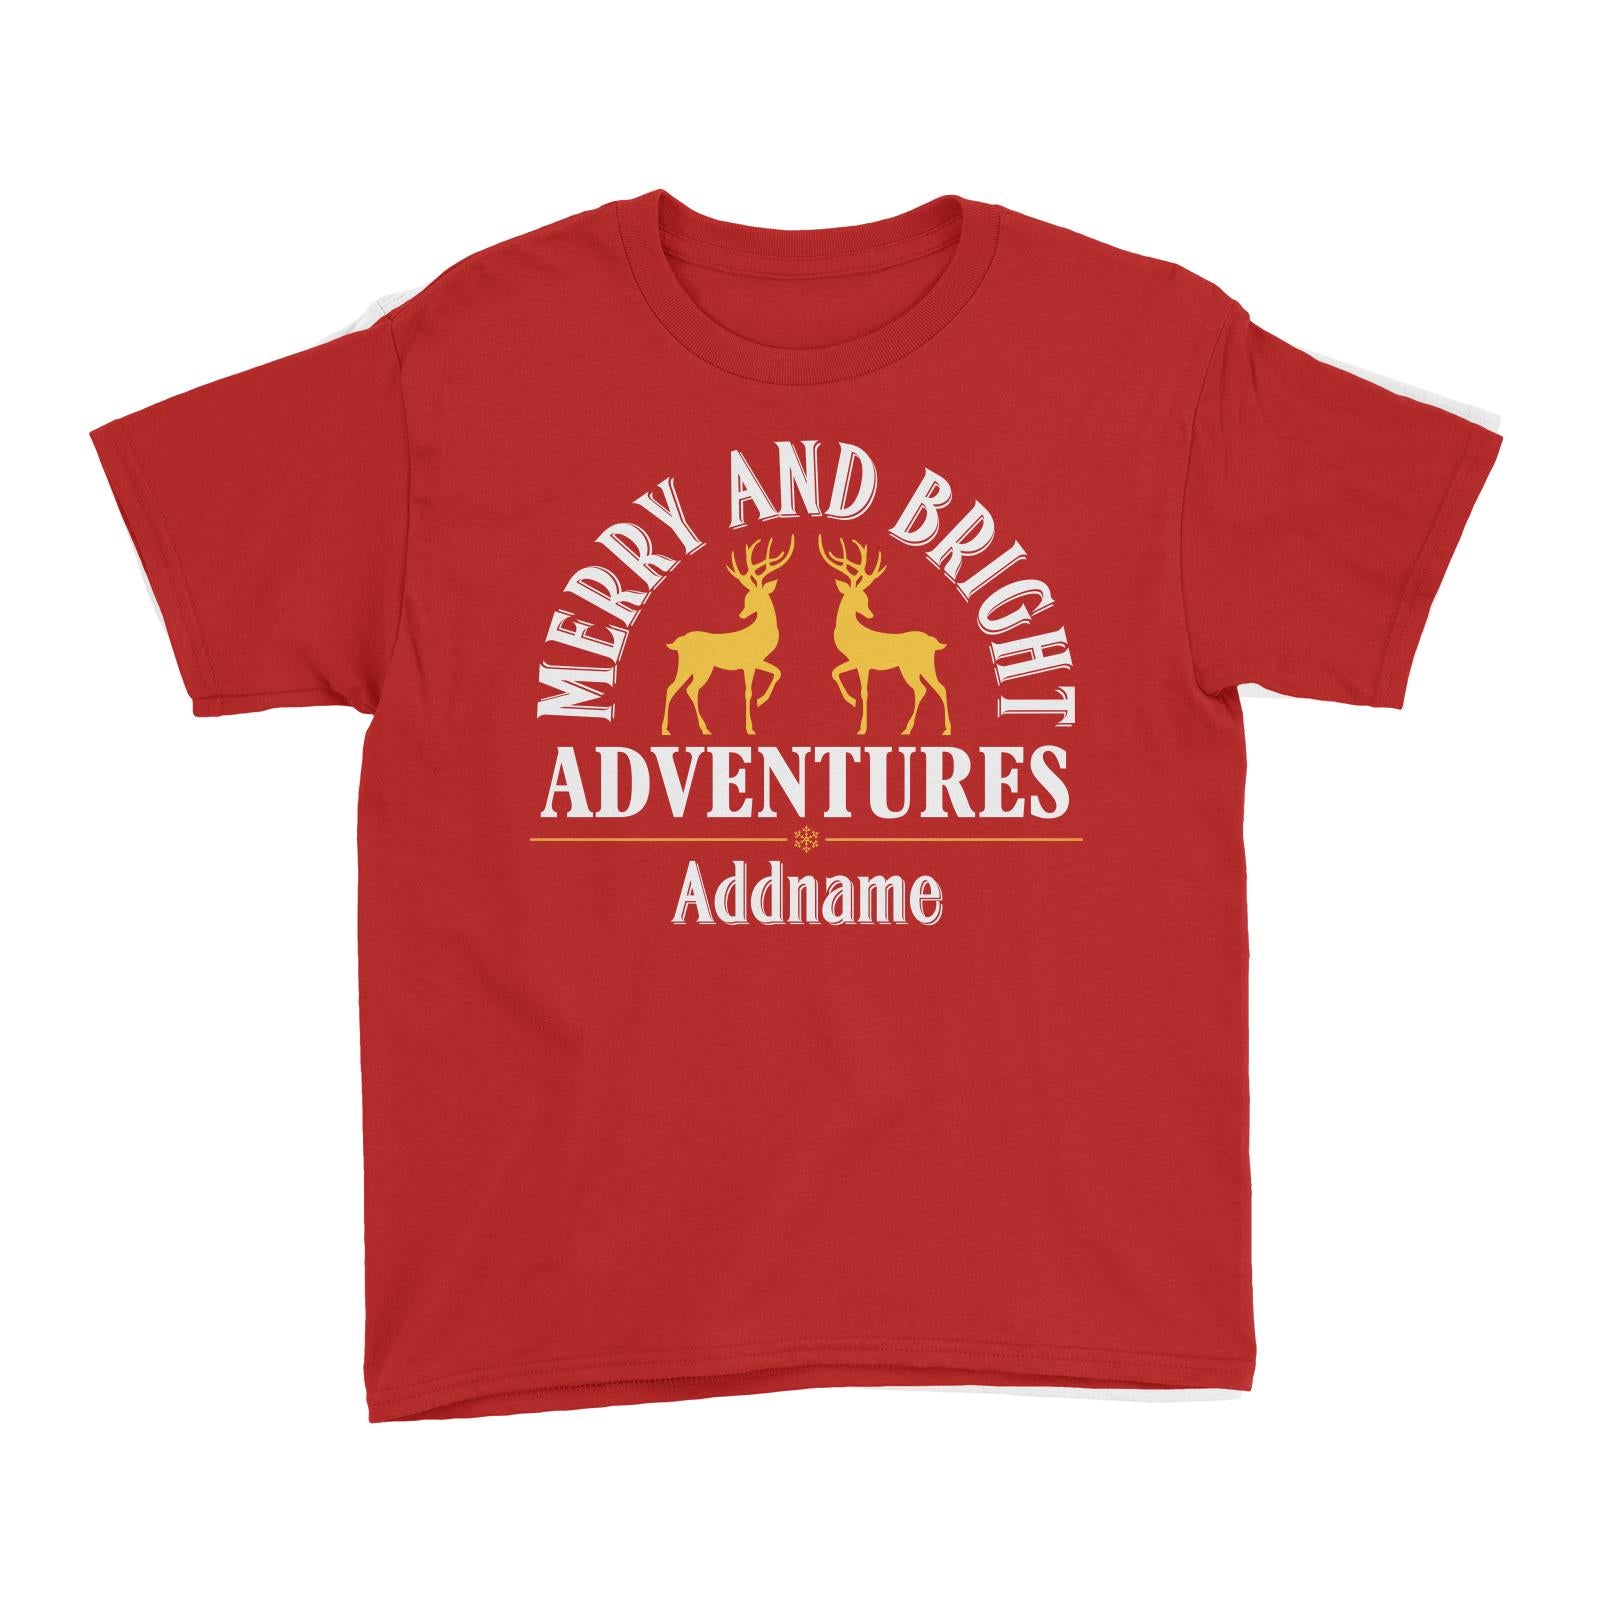 Xmas Merry and Bright Adventures with Reindeers Kid's T-Shirt